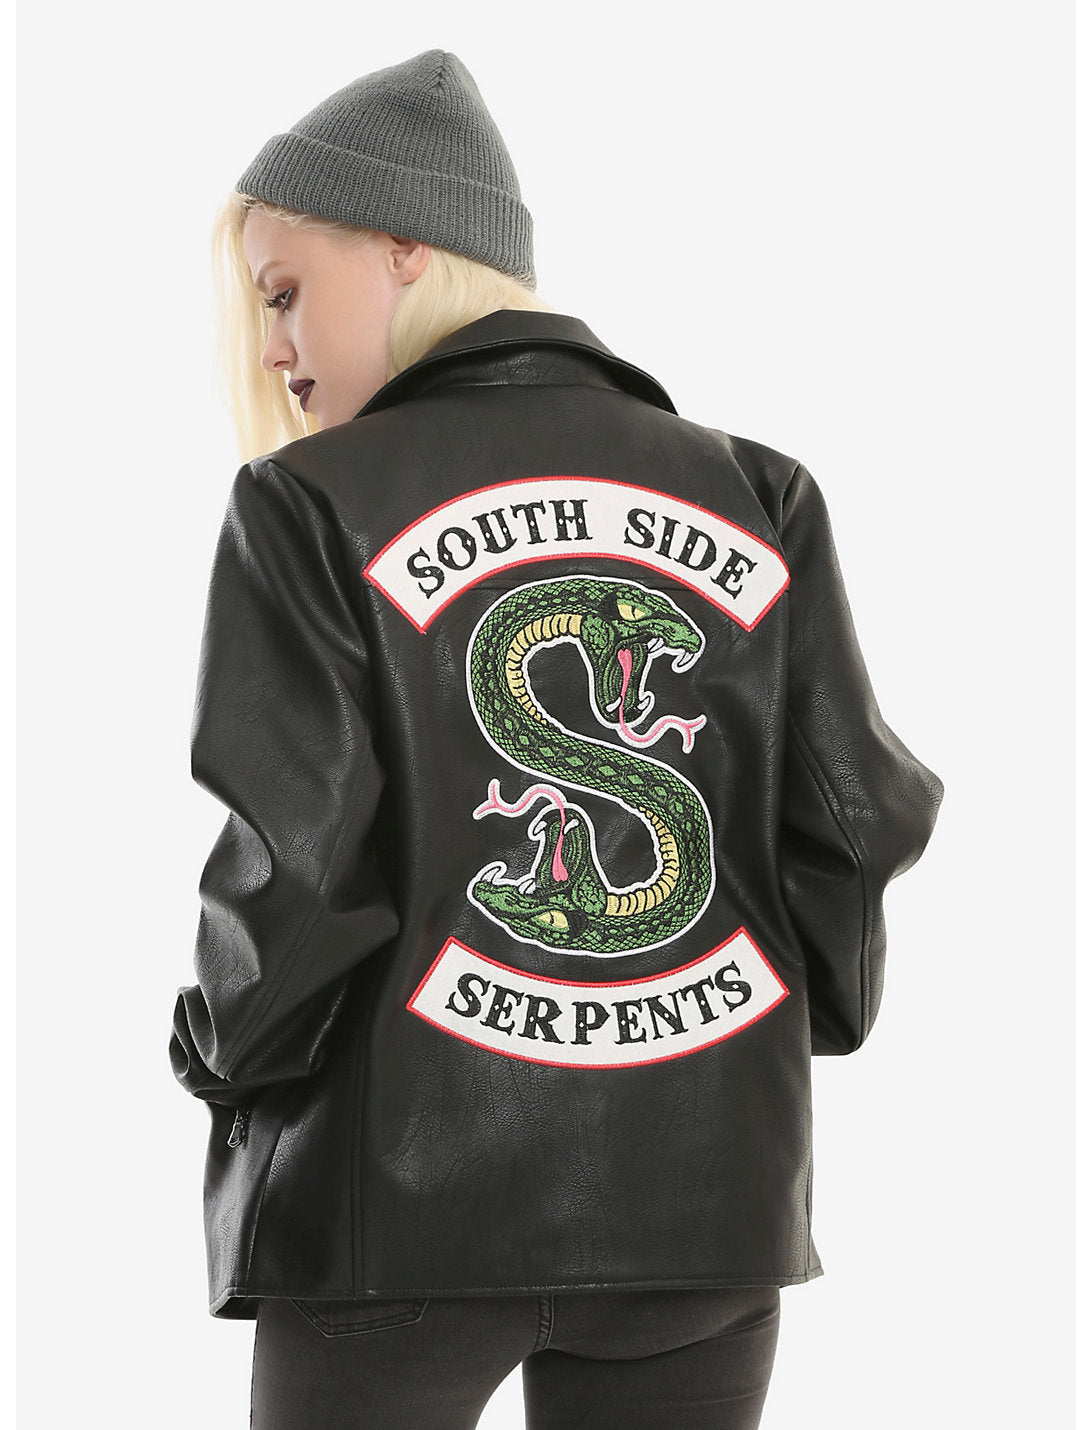 Junior's Black Riverdale Southside Serpents show Faux Leather Ja – Distributor, Inc. Wholesale Licensed Products and T-shirts, Sporting